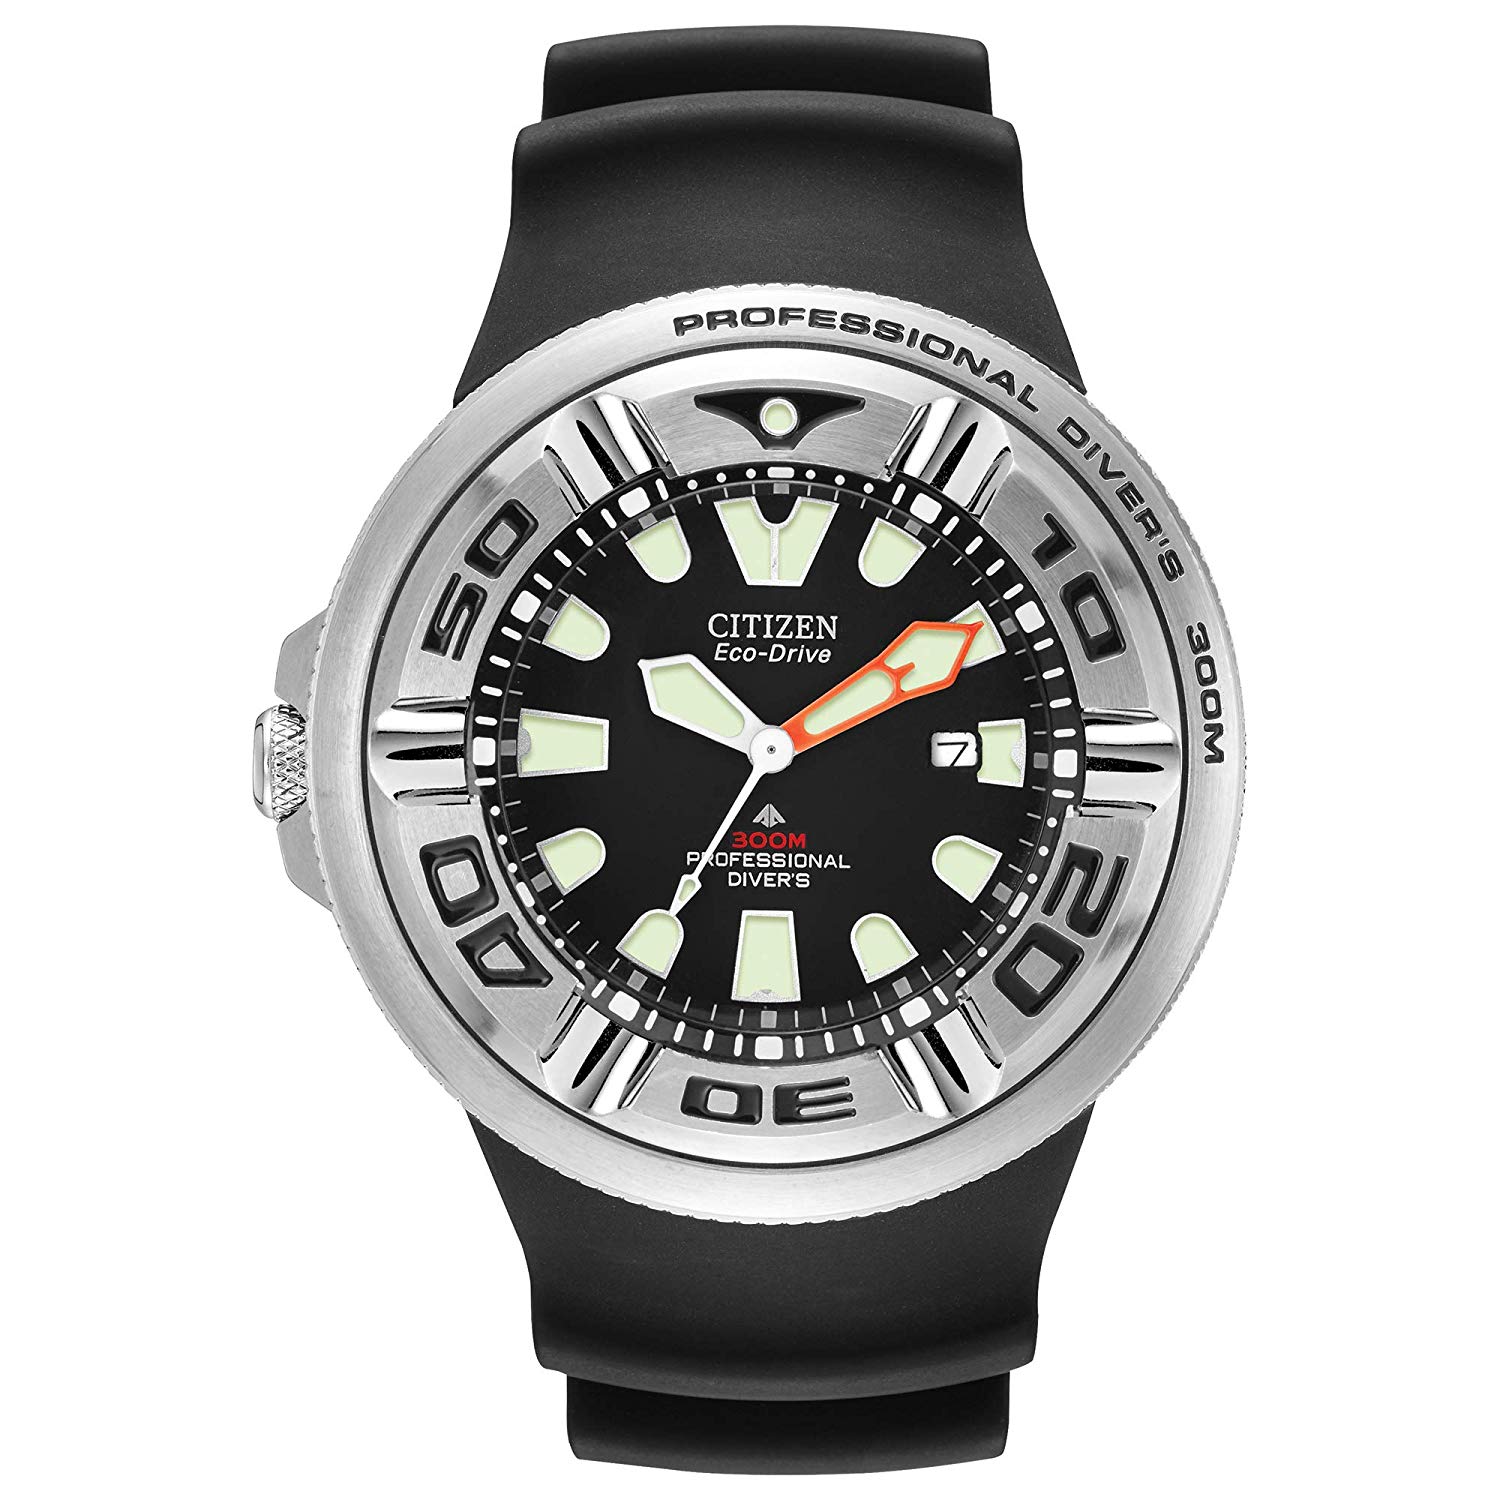 Citizen Men's Eco-Drive Promaster Diver Watch with...